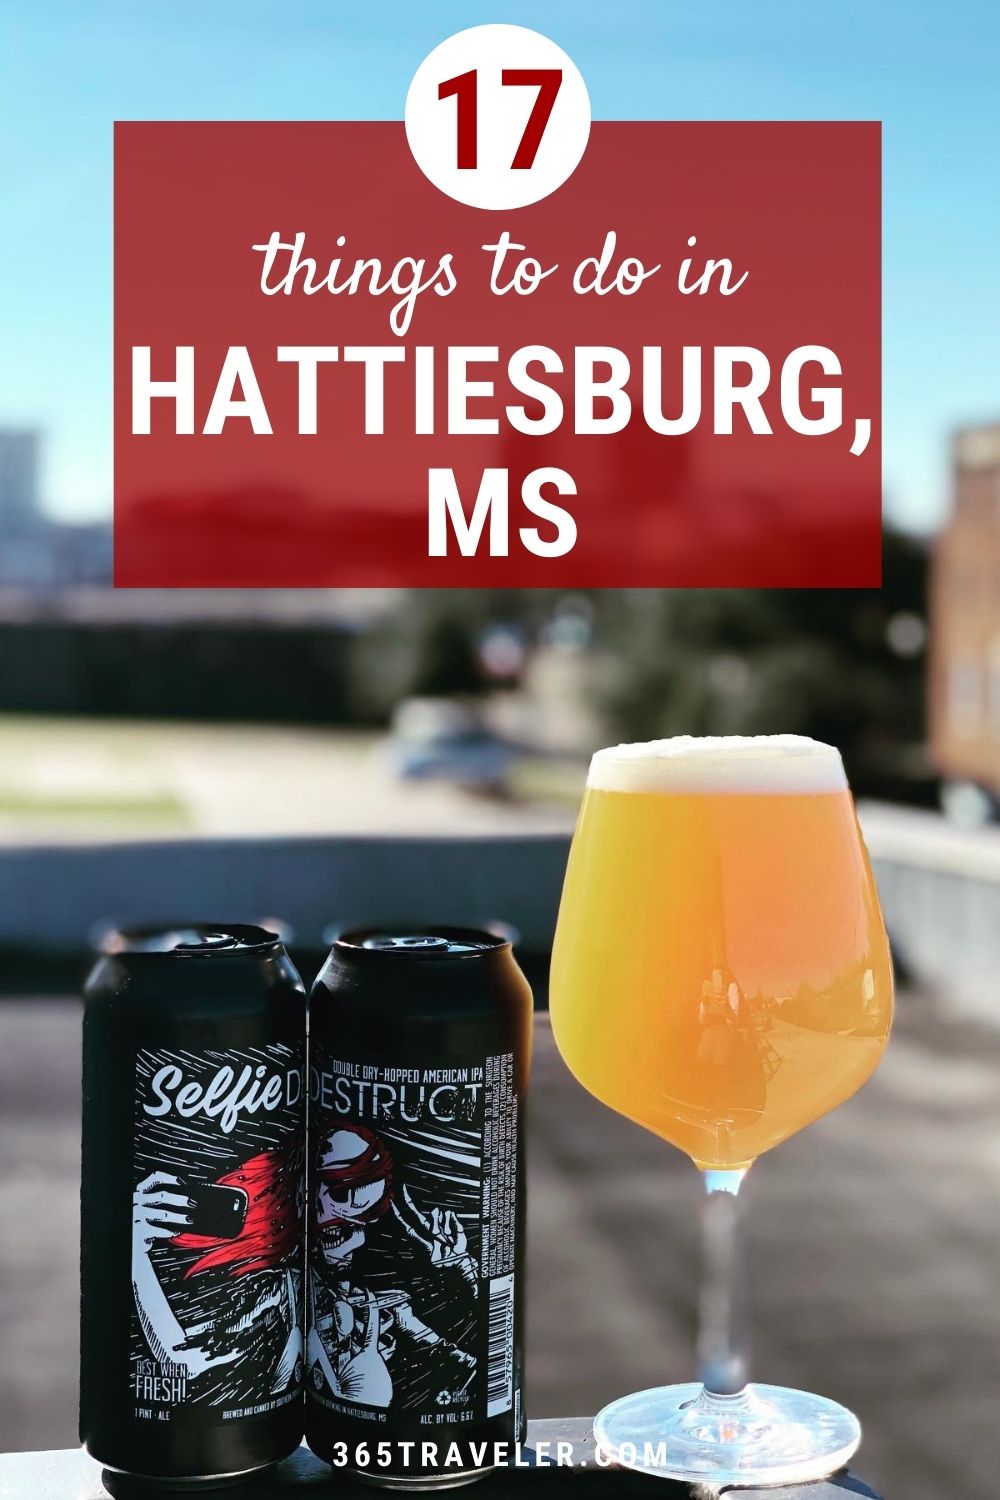 17 THINGS TO DO IN HATTIESBURG MS YOU'LL LOVE